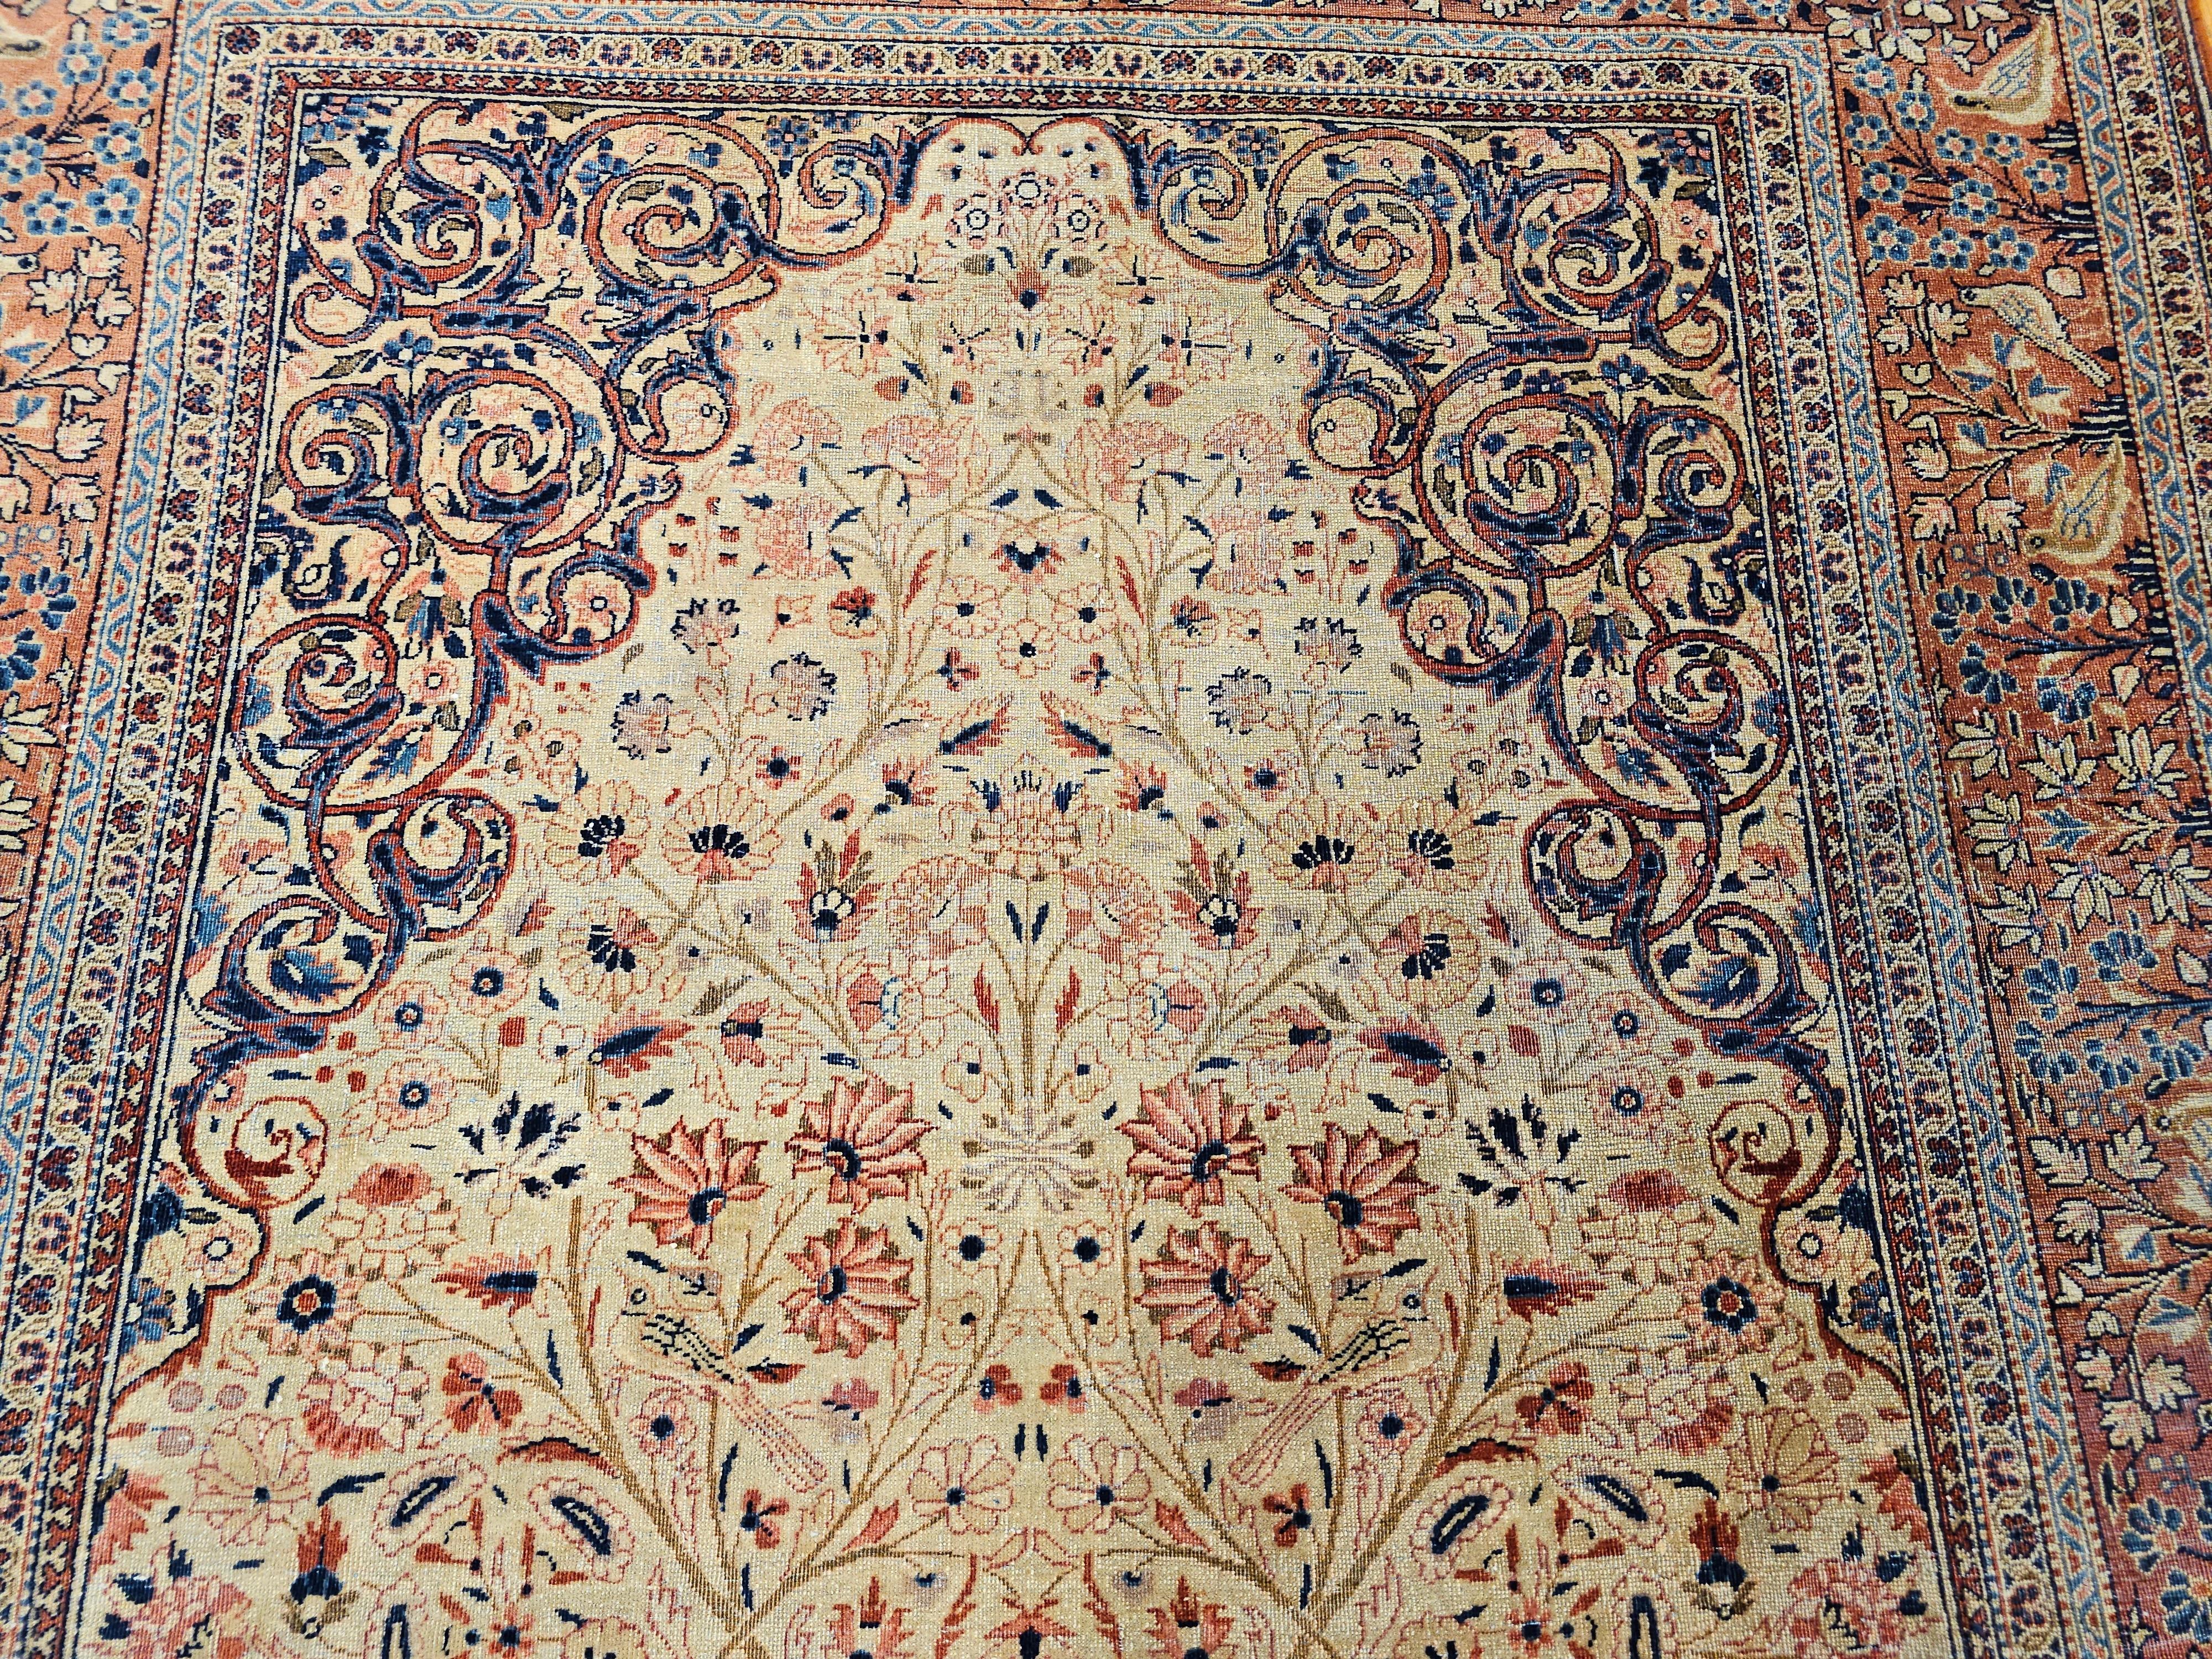 19th Century Persian Kashan “Tree of Life” Vase Rug in Ivory, Brick Red, Navy For Sale 8